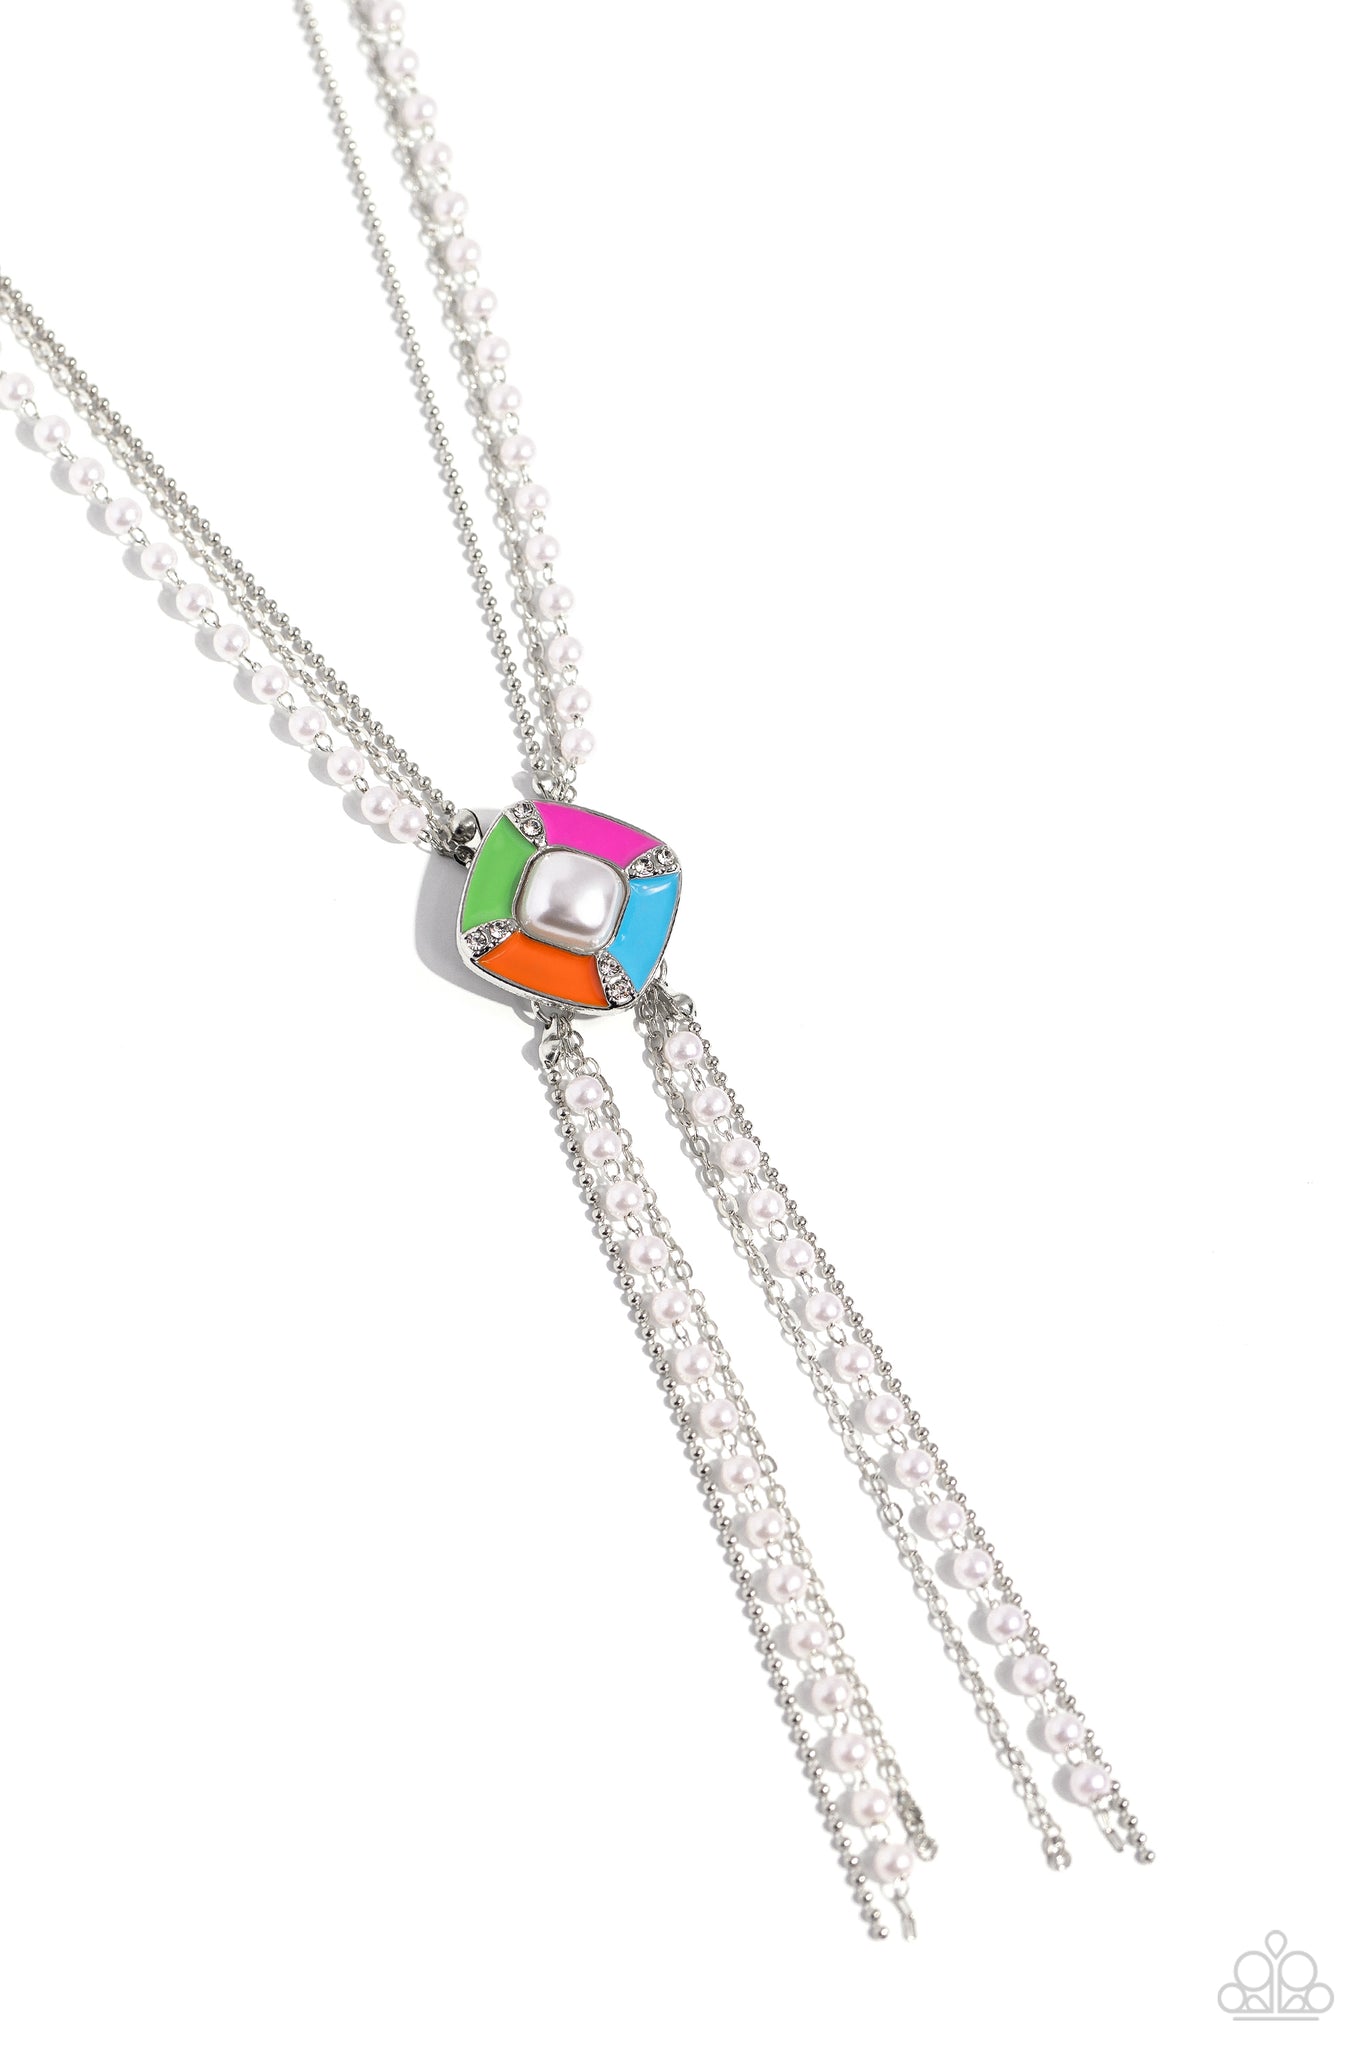 I Pinky SQUARE Necklace (Multi, Red)